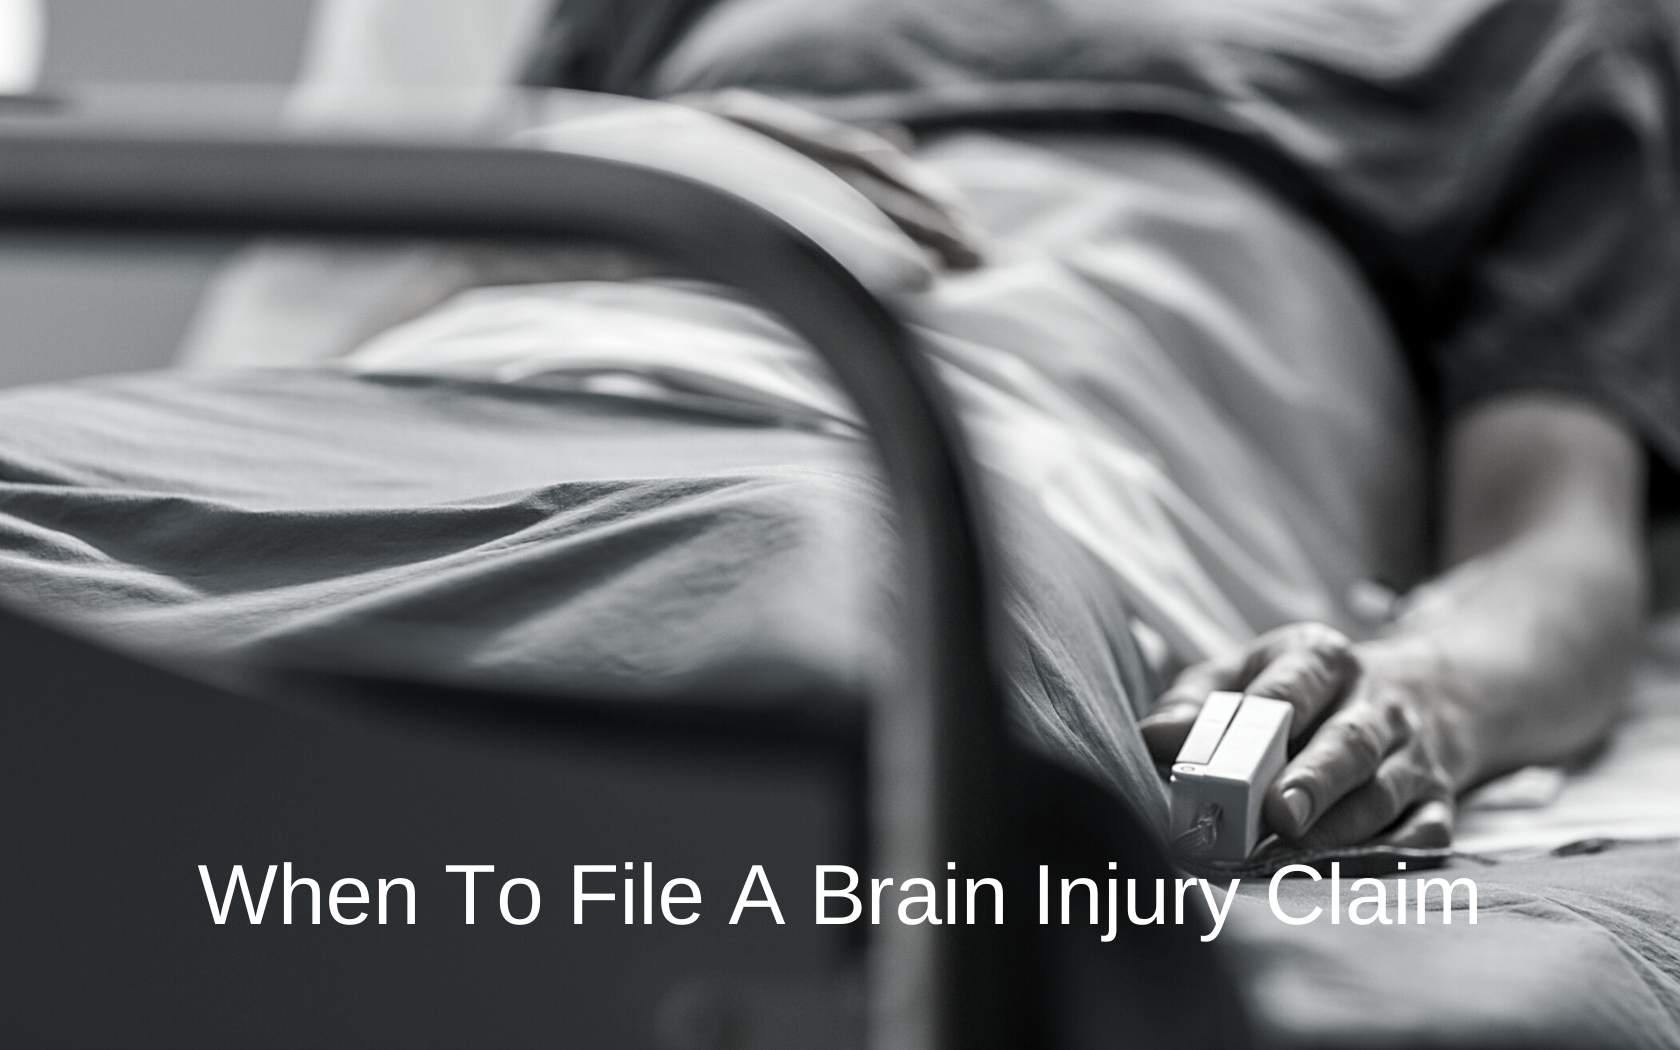 A patient in a hospital bed endures brain damage.